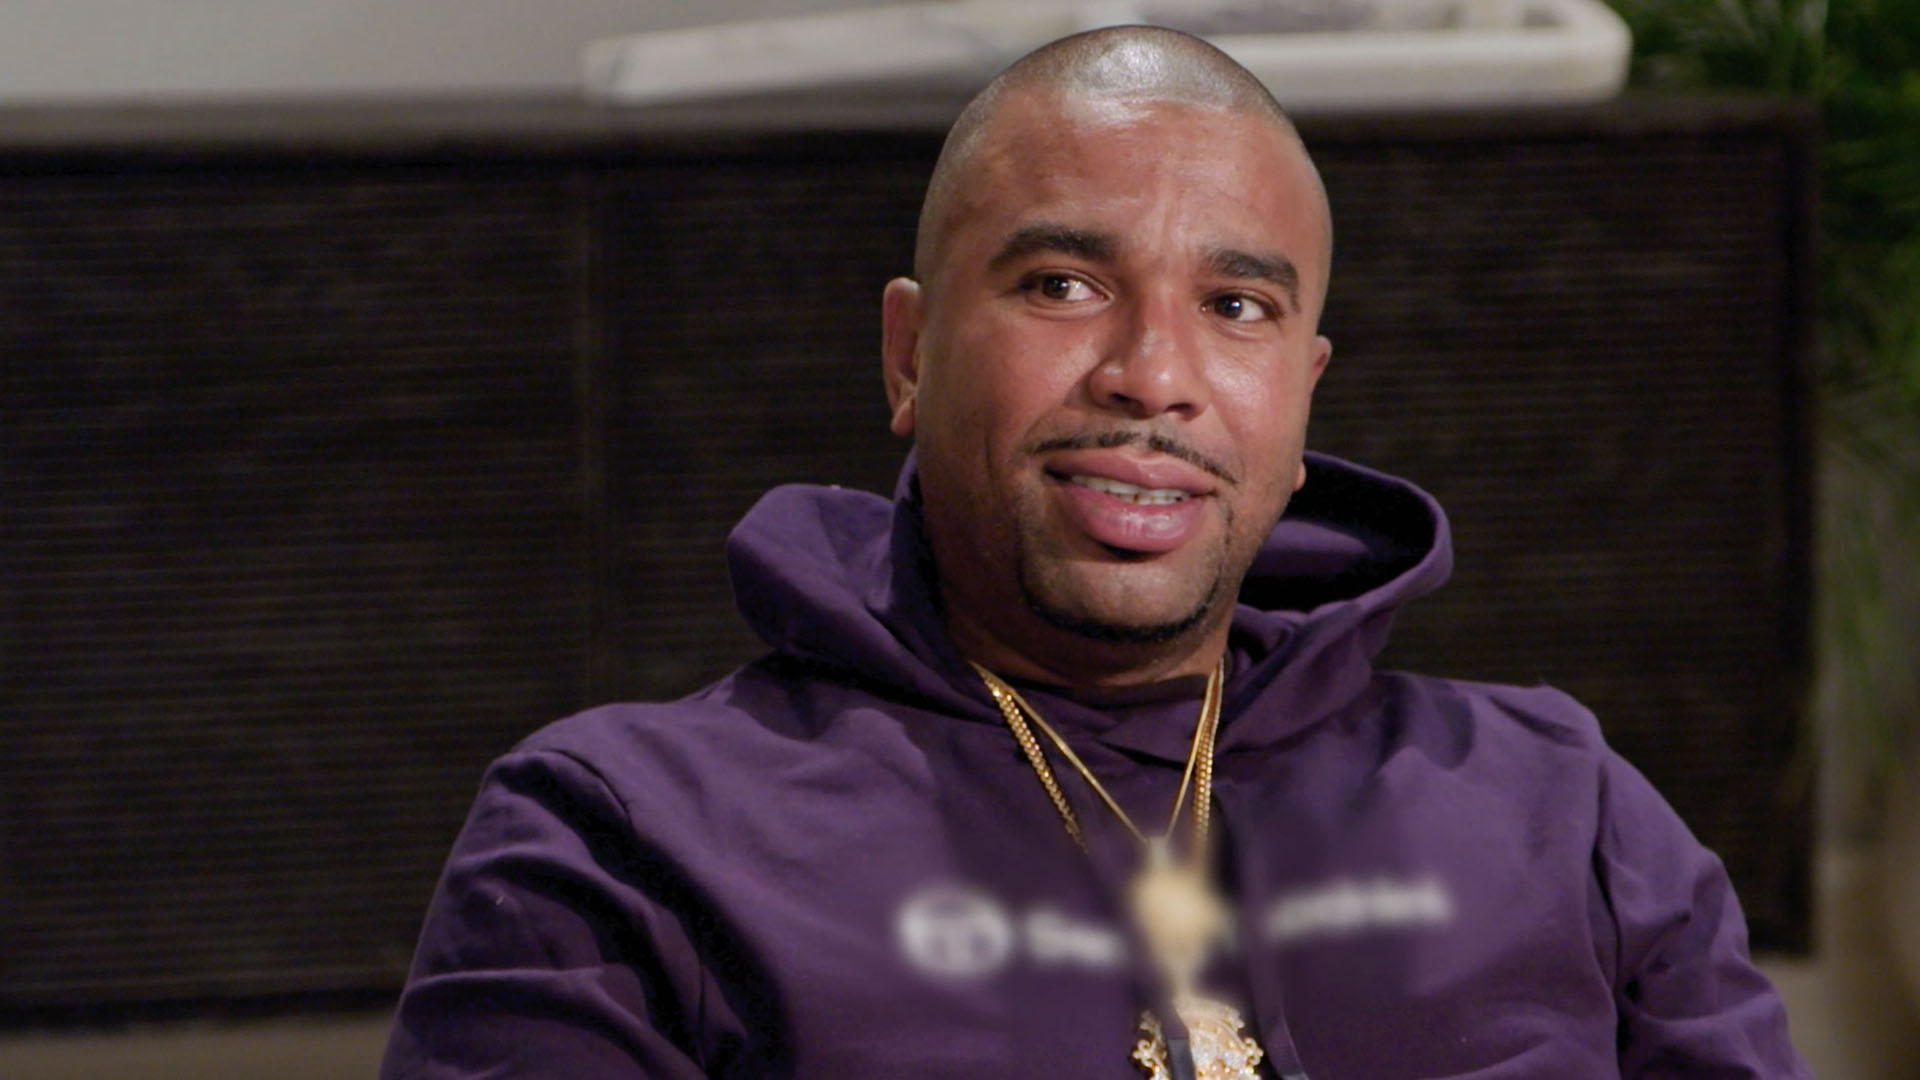 Watch #HipHopBootCamp MVP of the Week: N.O.R.E.! | Marriage Boot Camp: Hip Hop Edition Video Extras